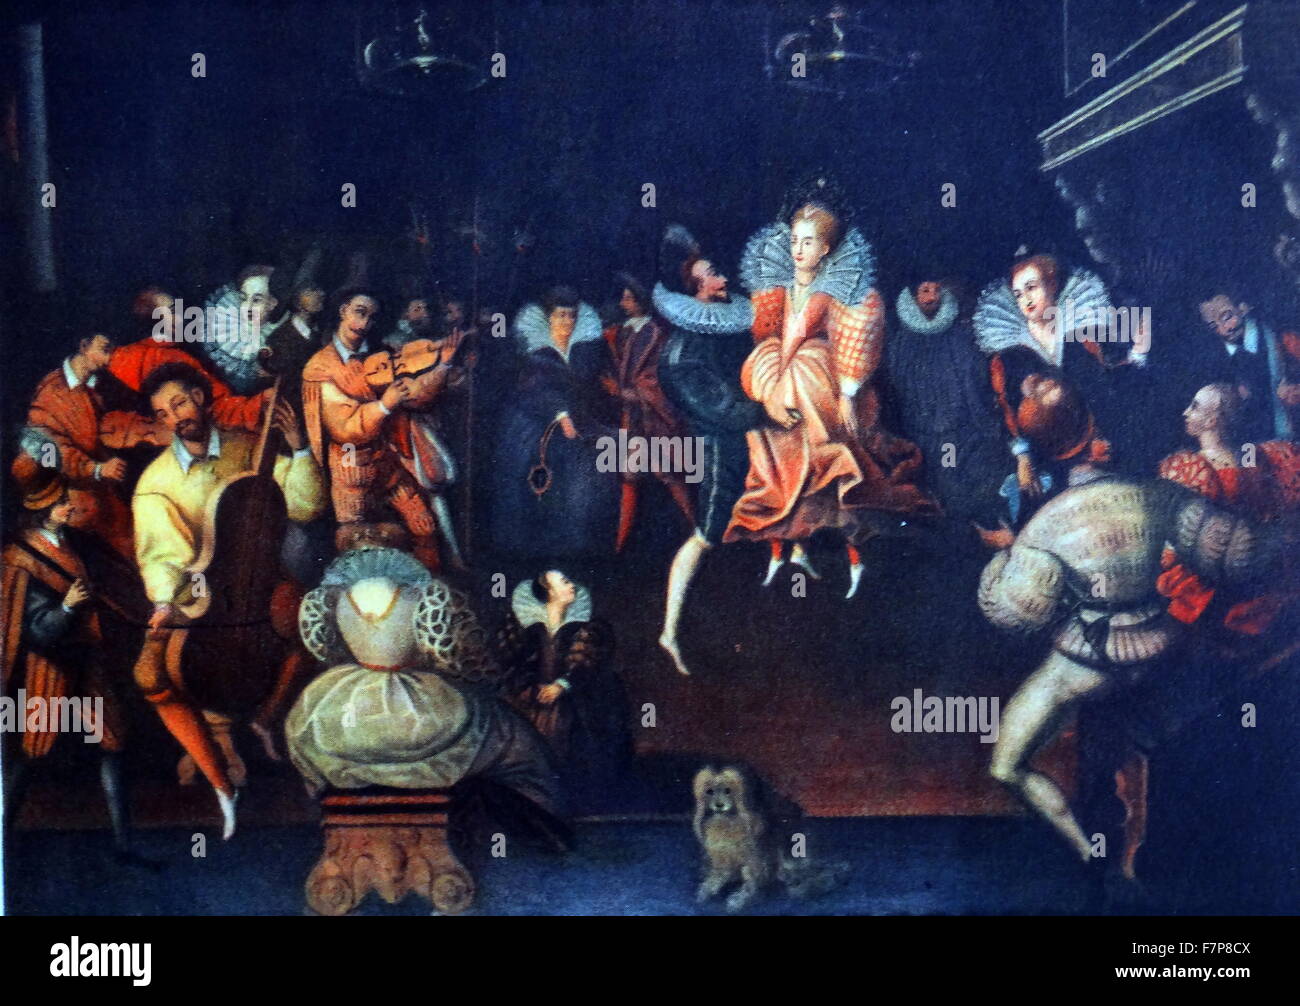 Queen Elizabeth 1st dancing at court in a traditional tudor court scene c1575 Stock Photo